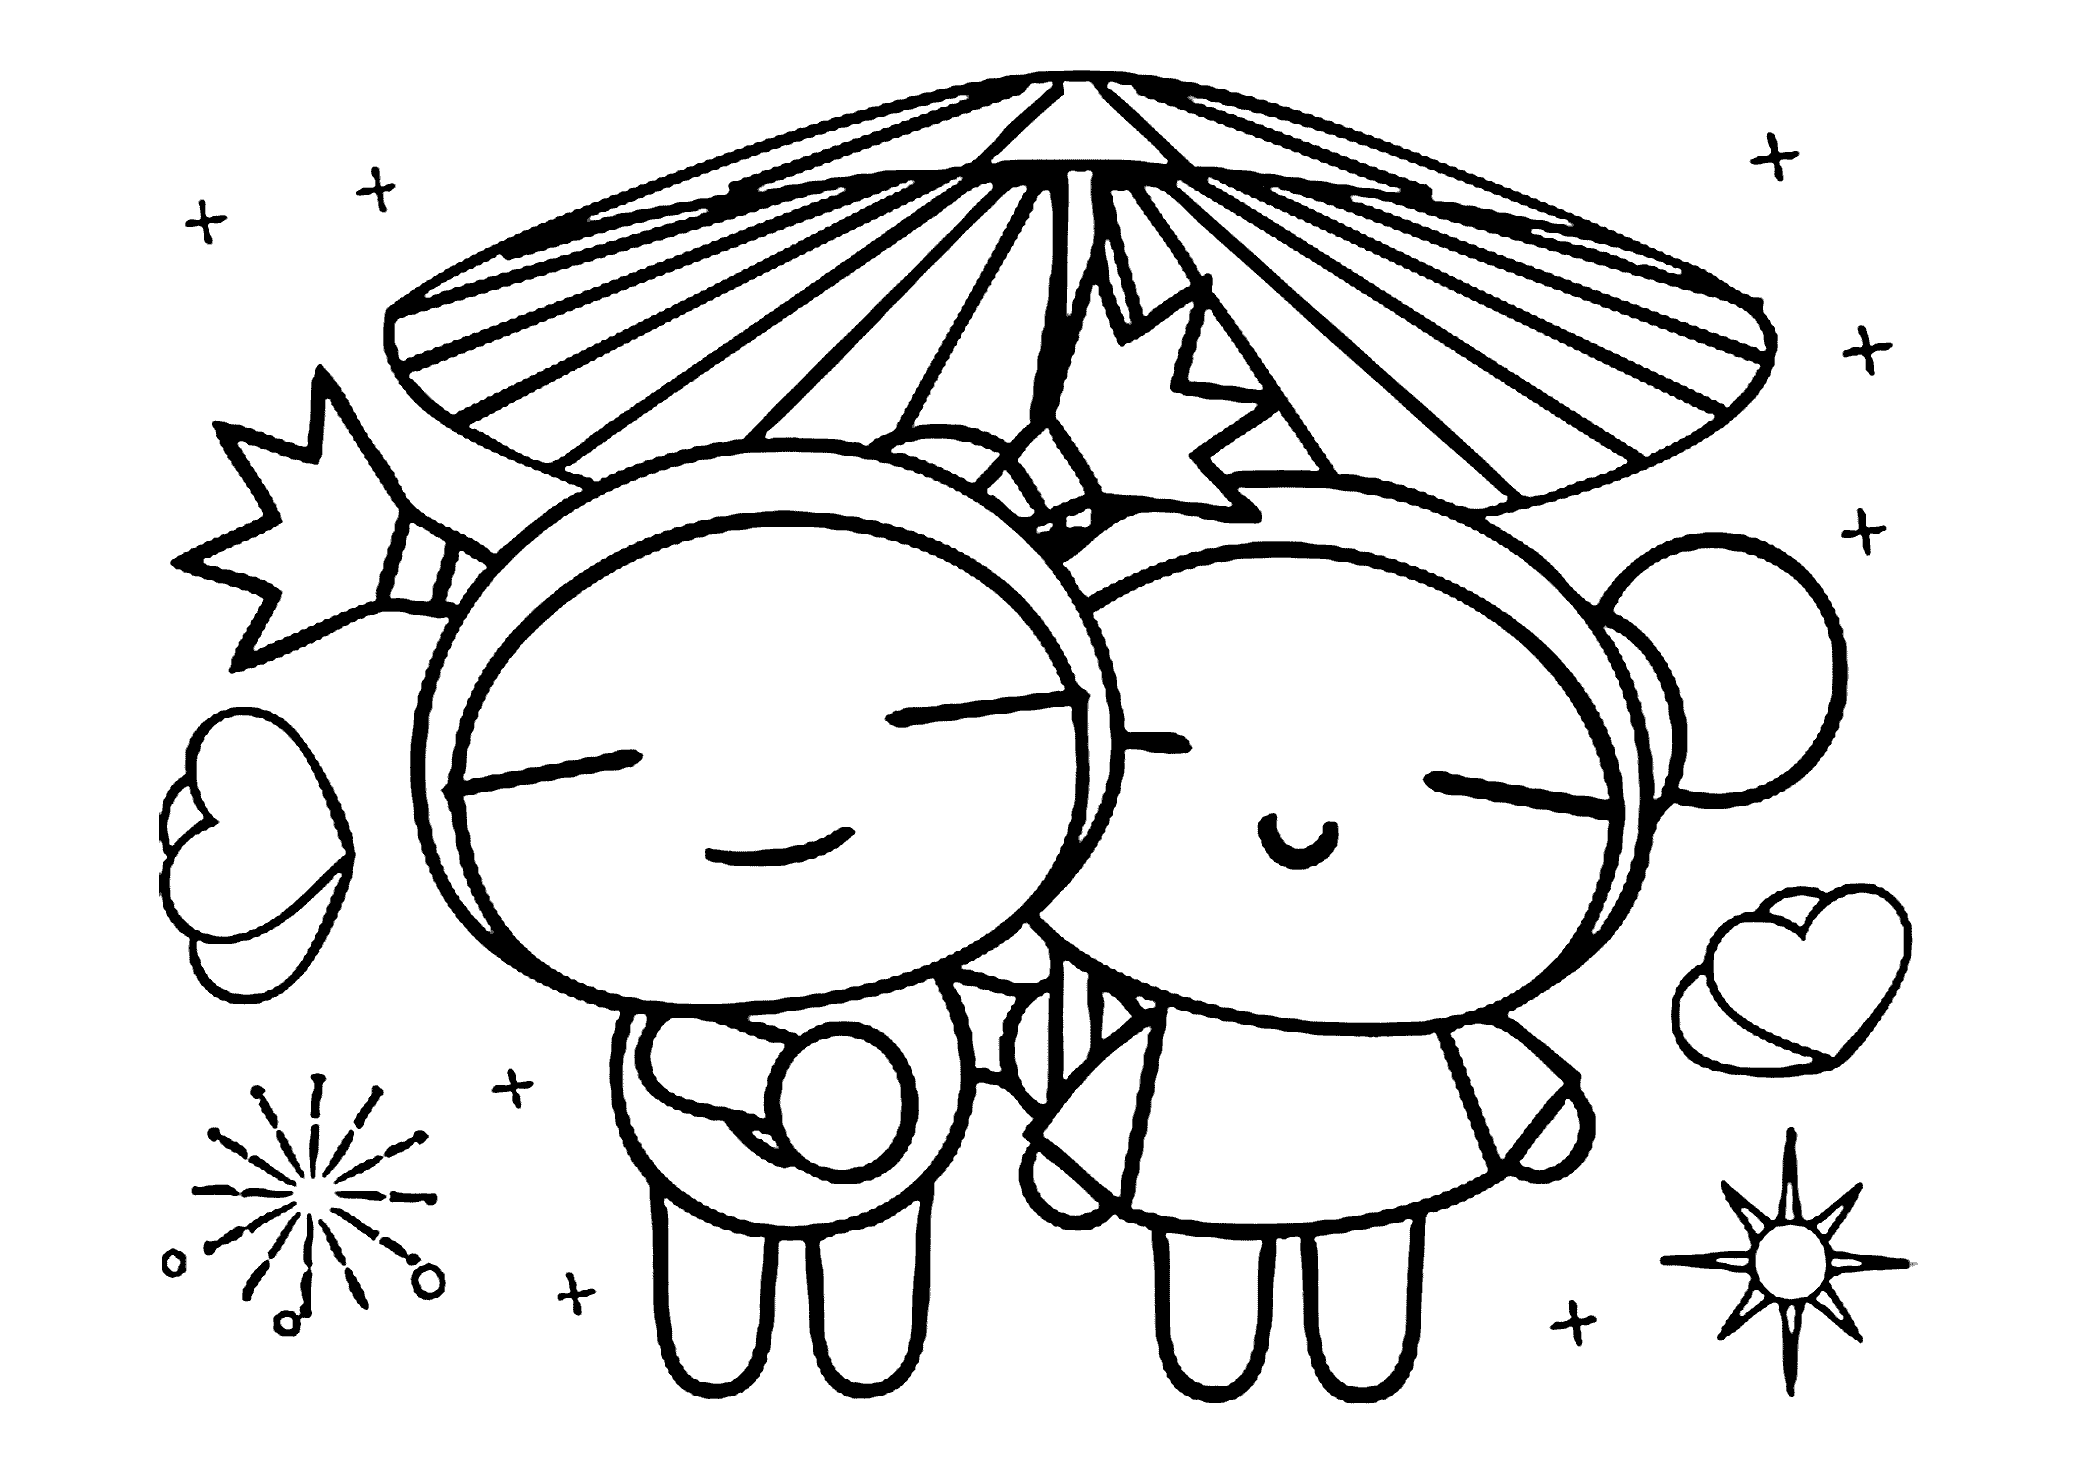 Pucca - Coloring Pages for Kids and for Adults